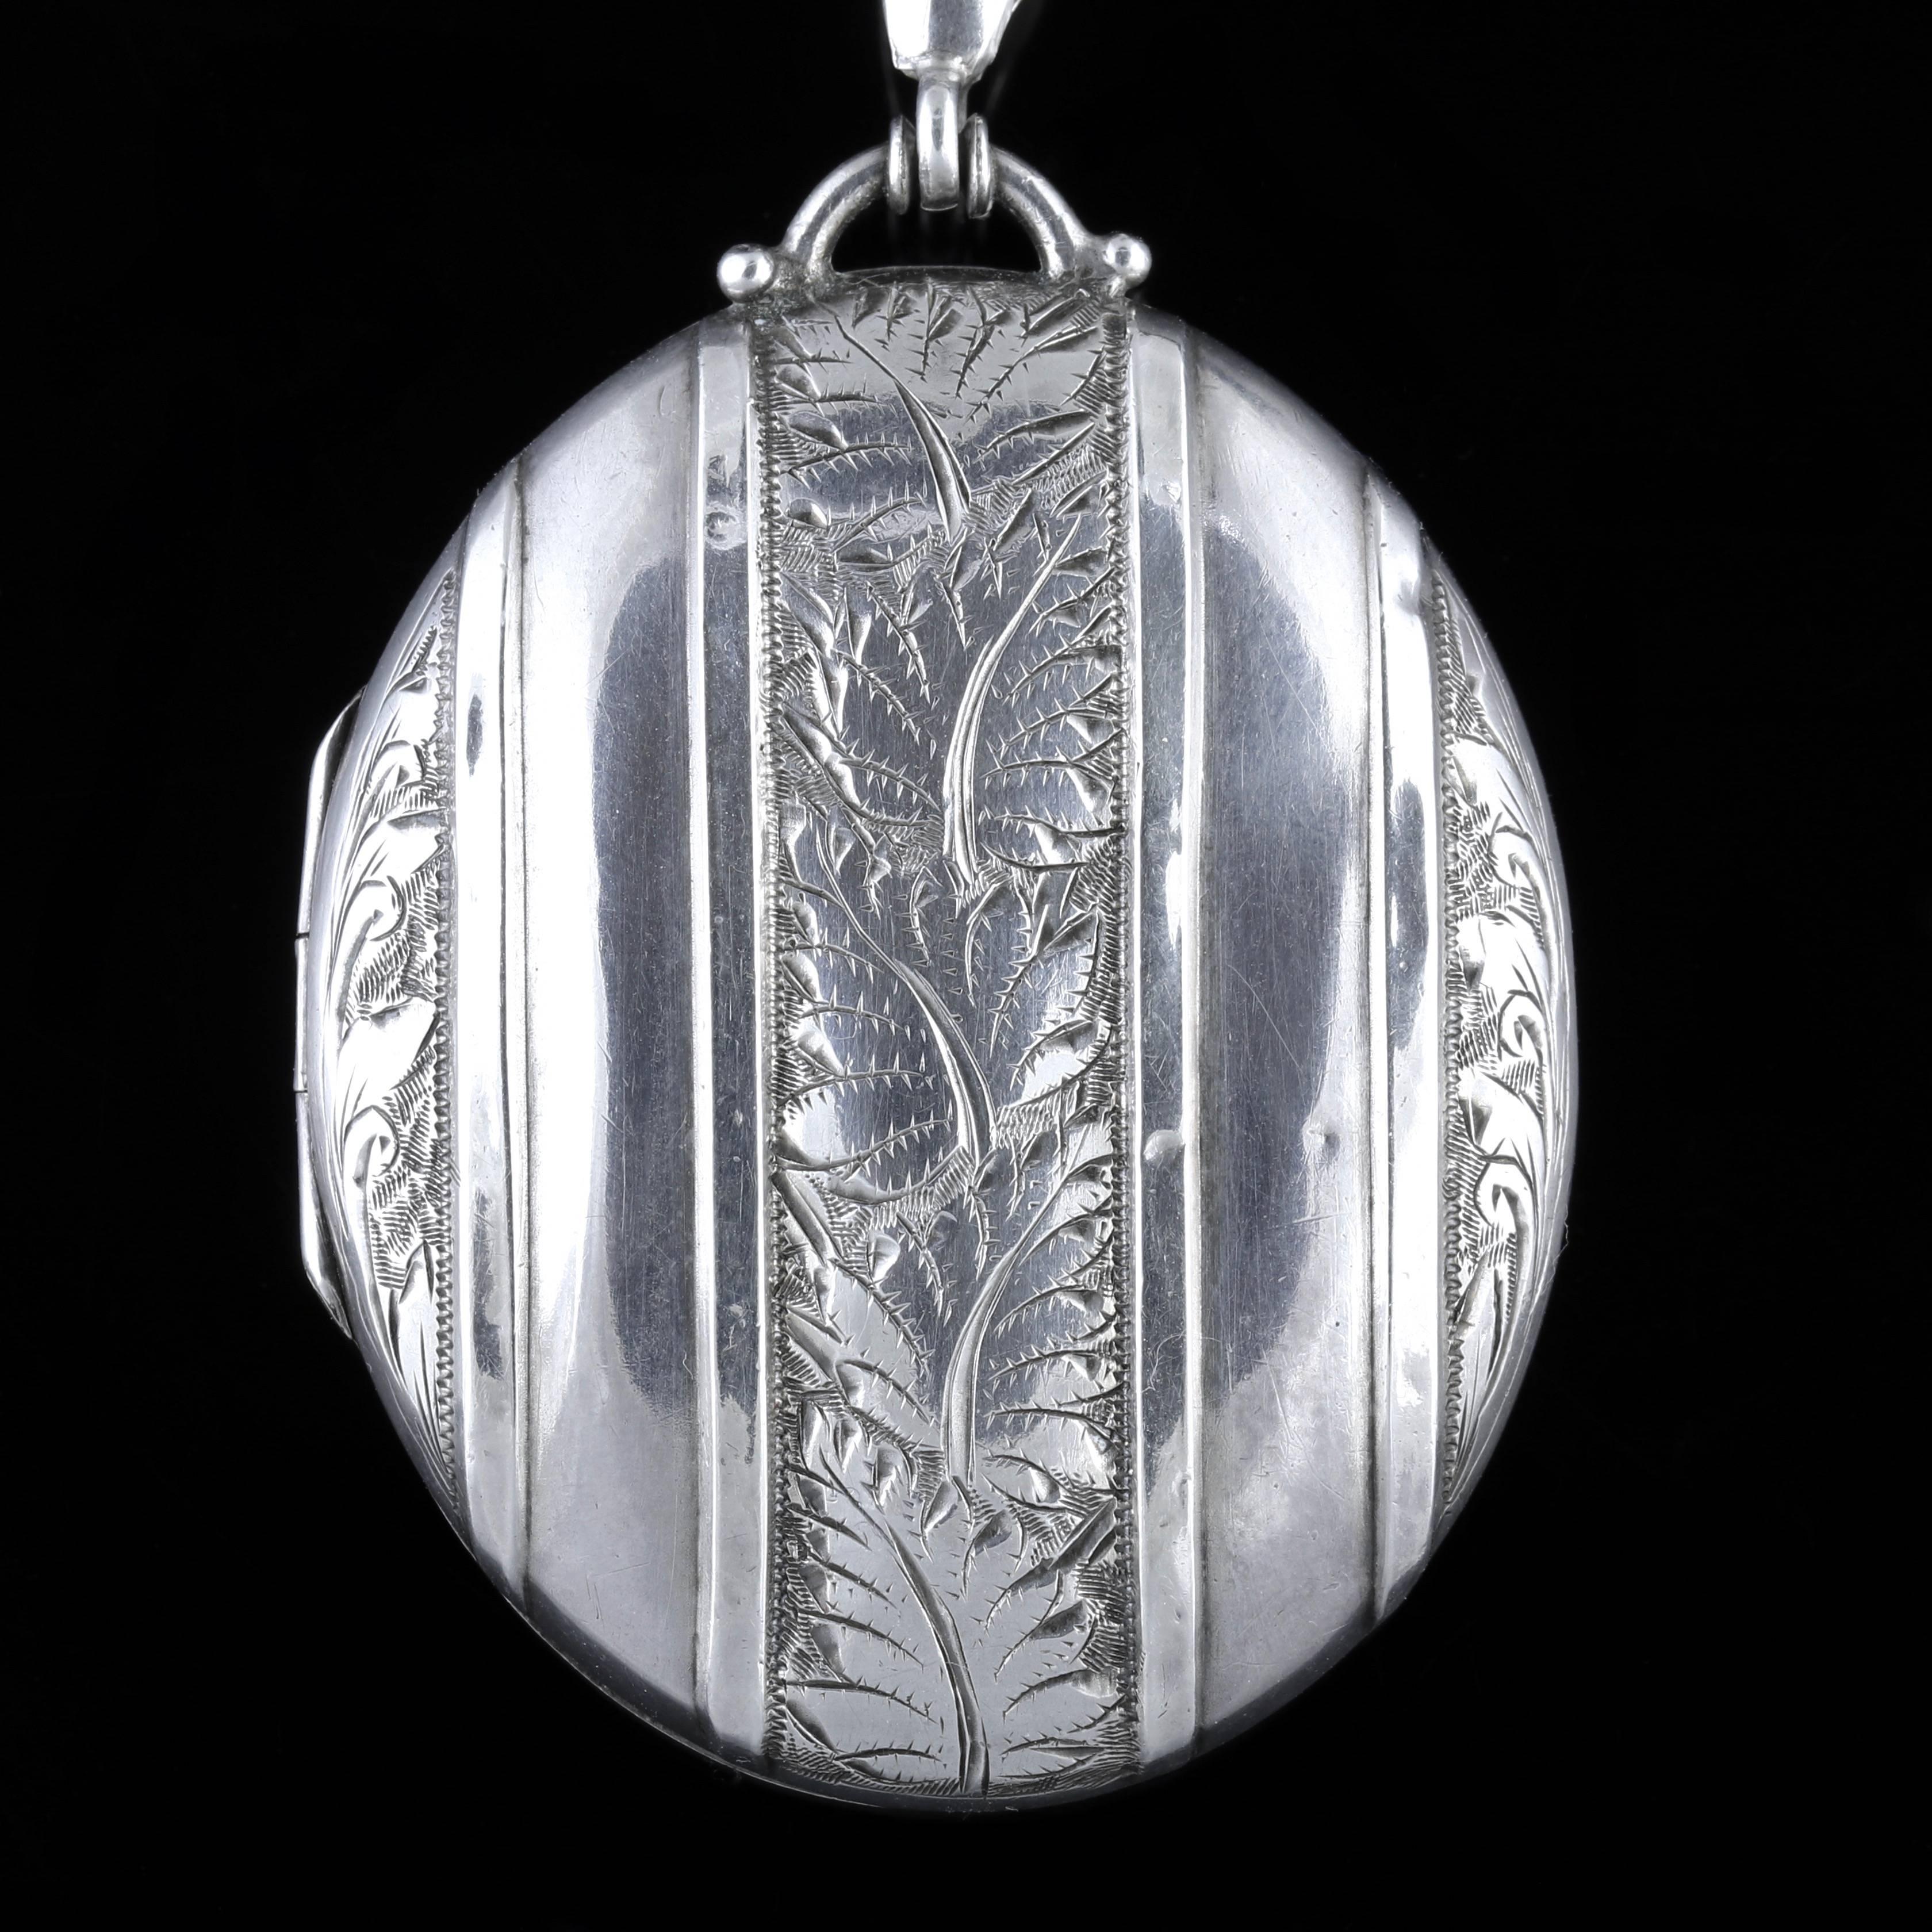 To read more please click continue reading below-

This wonderful Sterling Silver Victorian Collar and Locket is dated Birmingham 1881. 

The beautiful collar has original Silver workmanship that leads to a lovely large Silver engraved locket.

Ivy